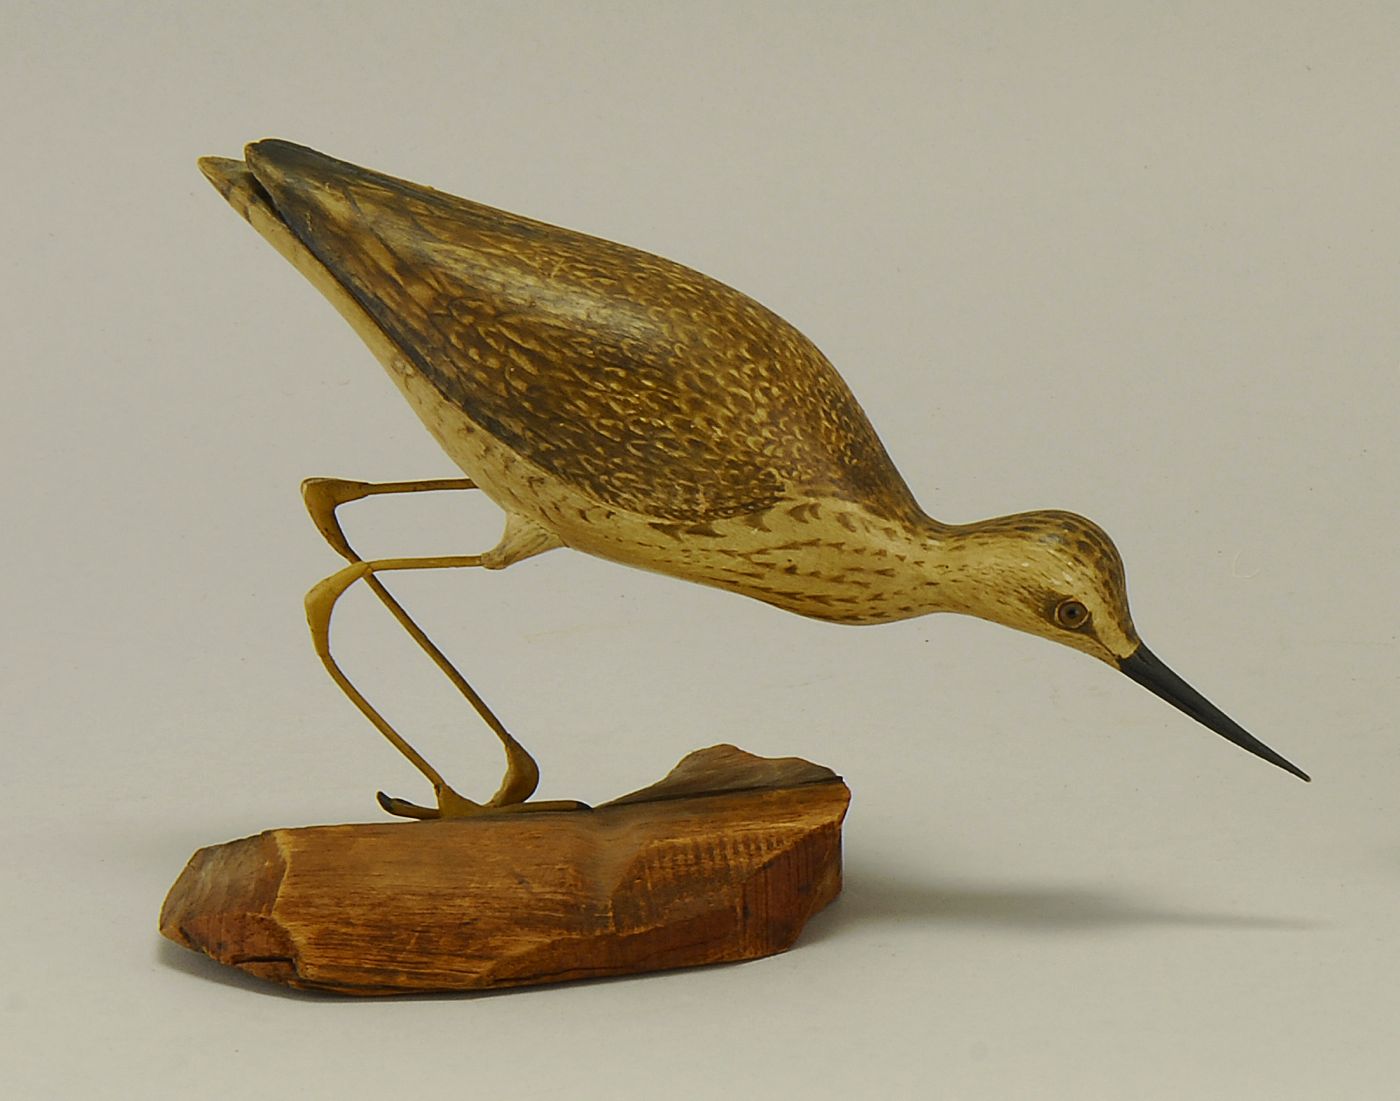 EARLY DECORATIVE YELLOWLEGS CARVINGFrom